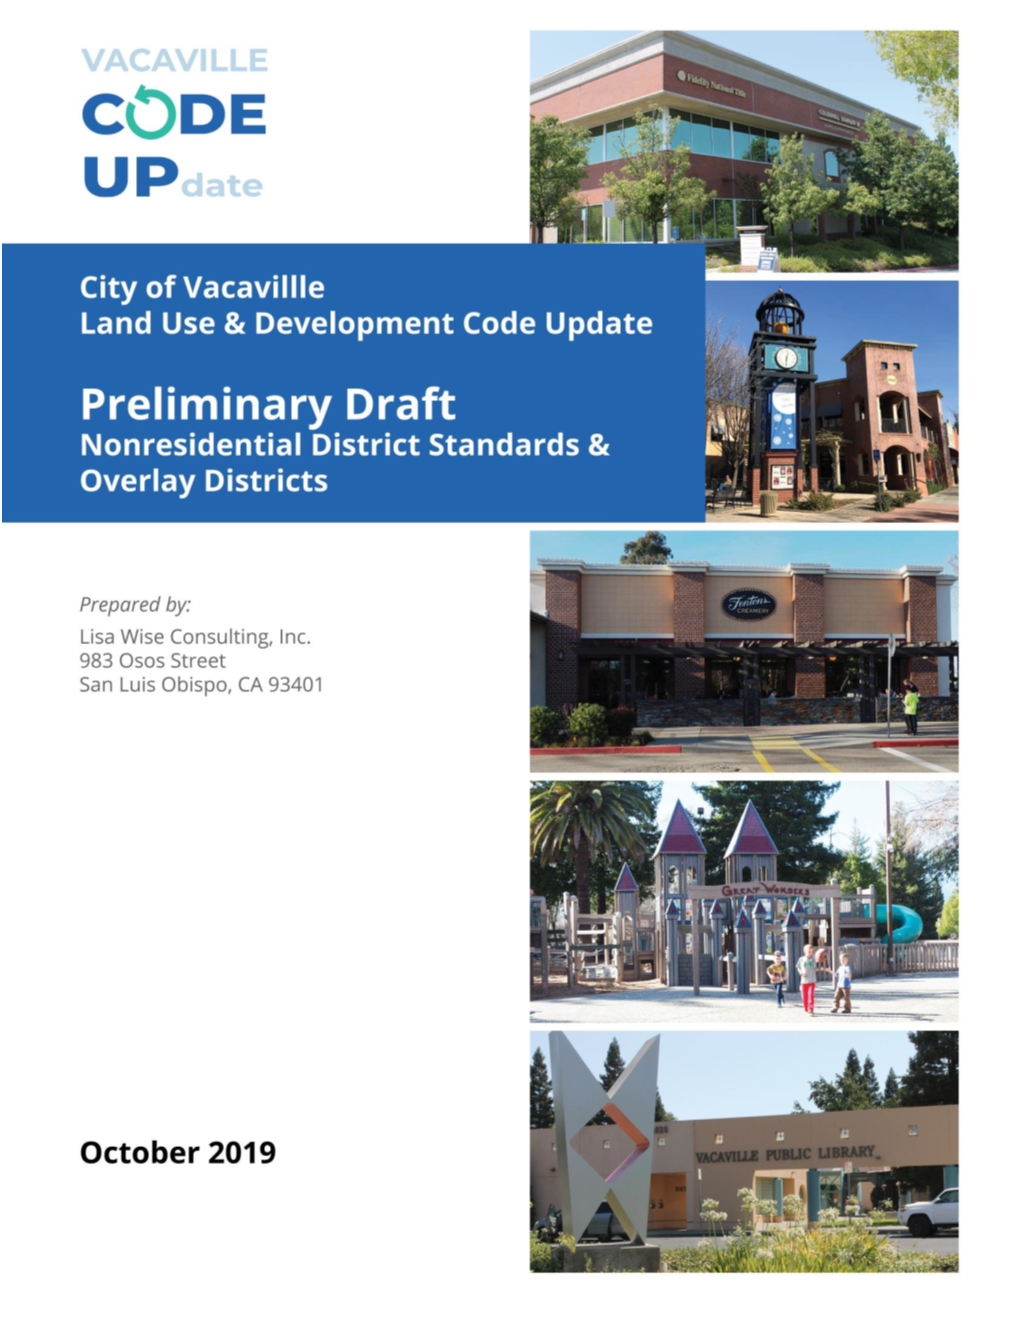 City of Vacaville Nonresidential District Development Standards And